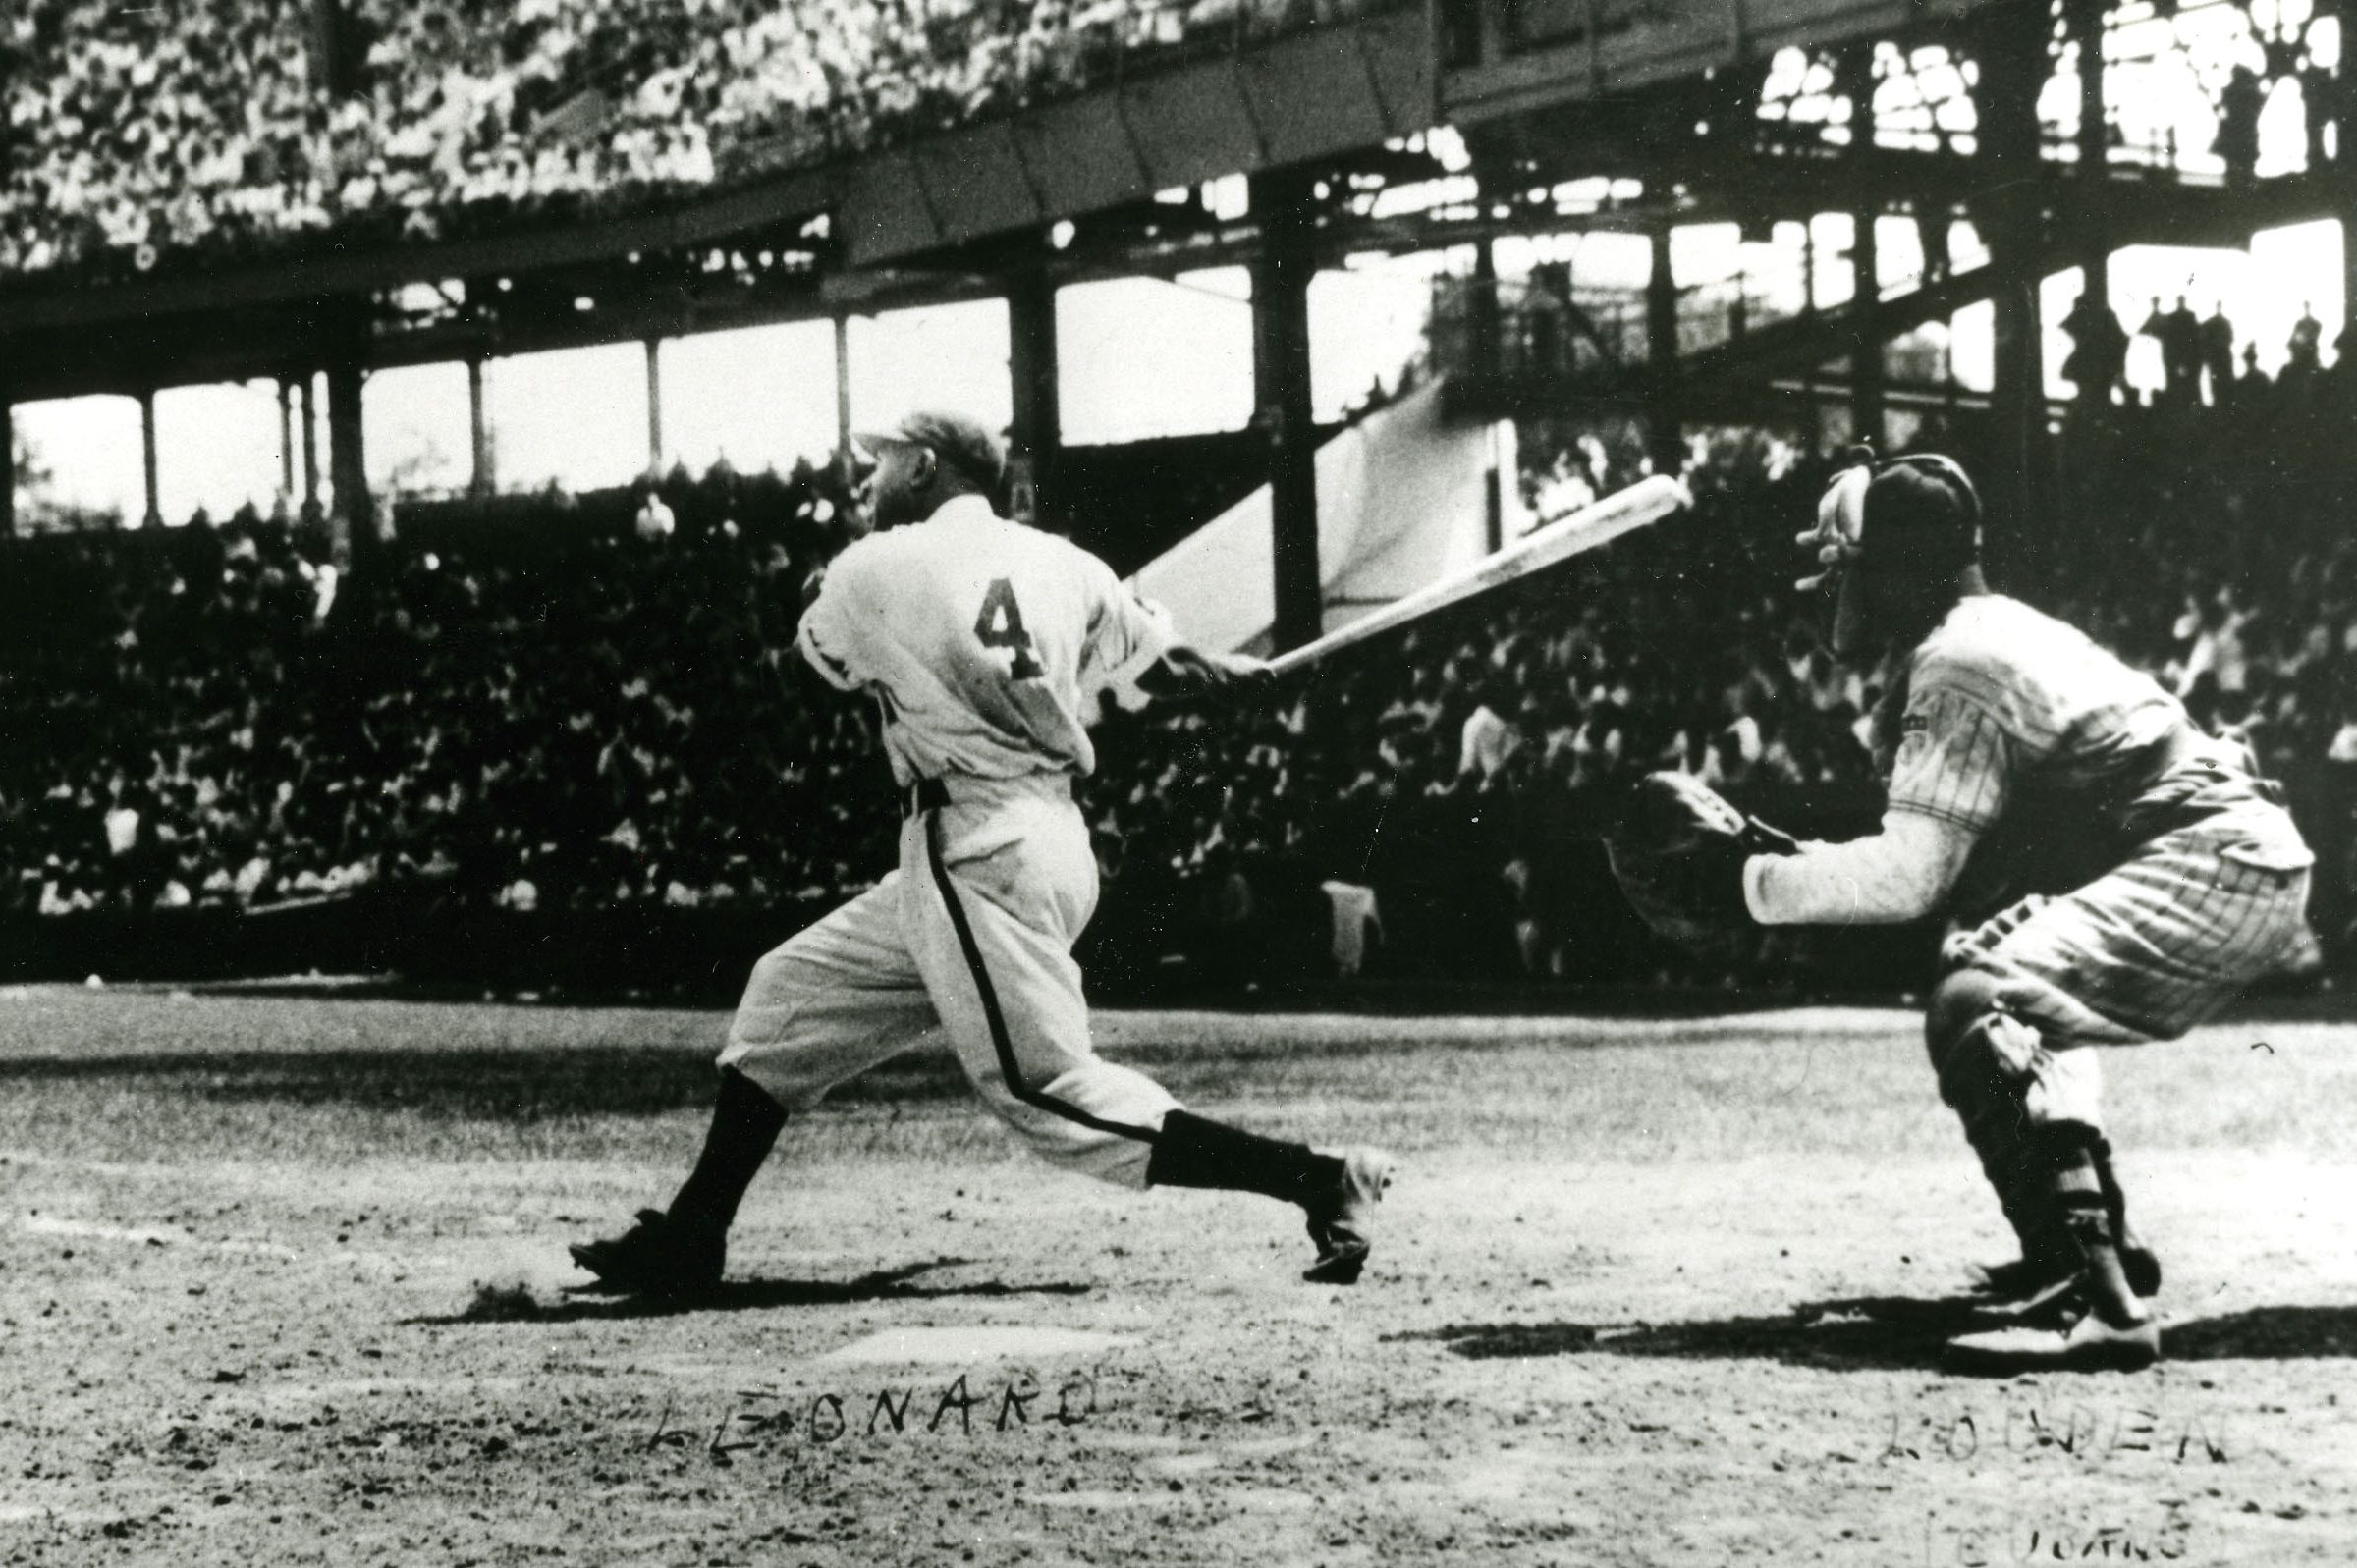 THE BIG PICTURE | The Negro Leagues